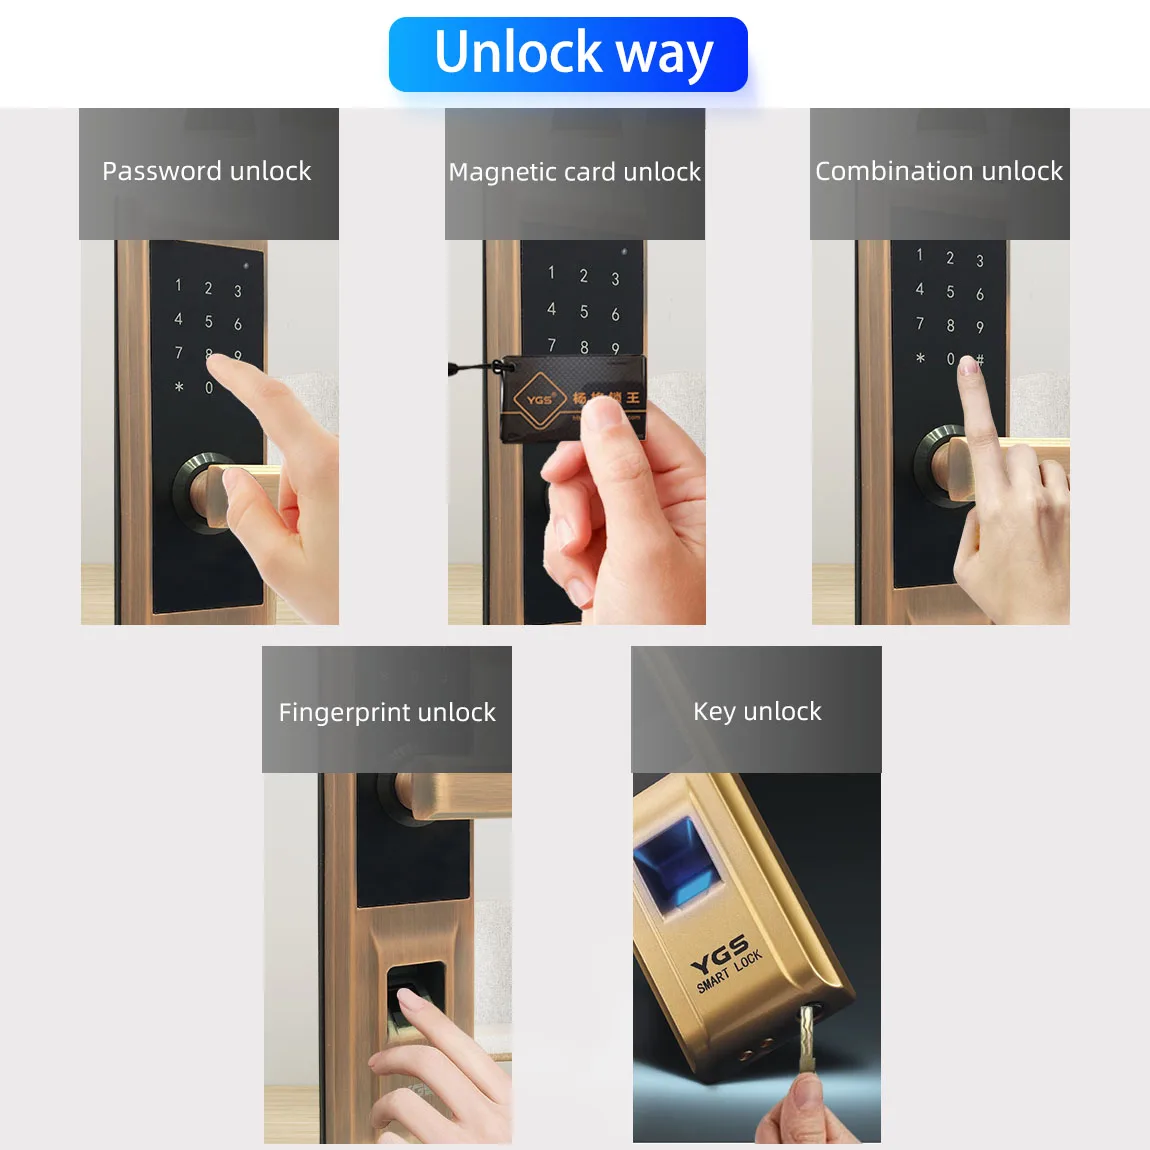 S0581 Latest Product High Strength Anti-Theft Entry Modern Smart Lock Manufacturer From China enlarge